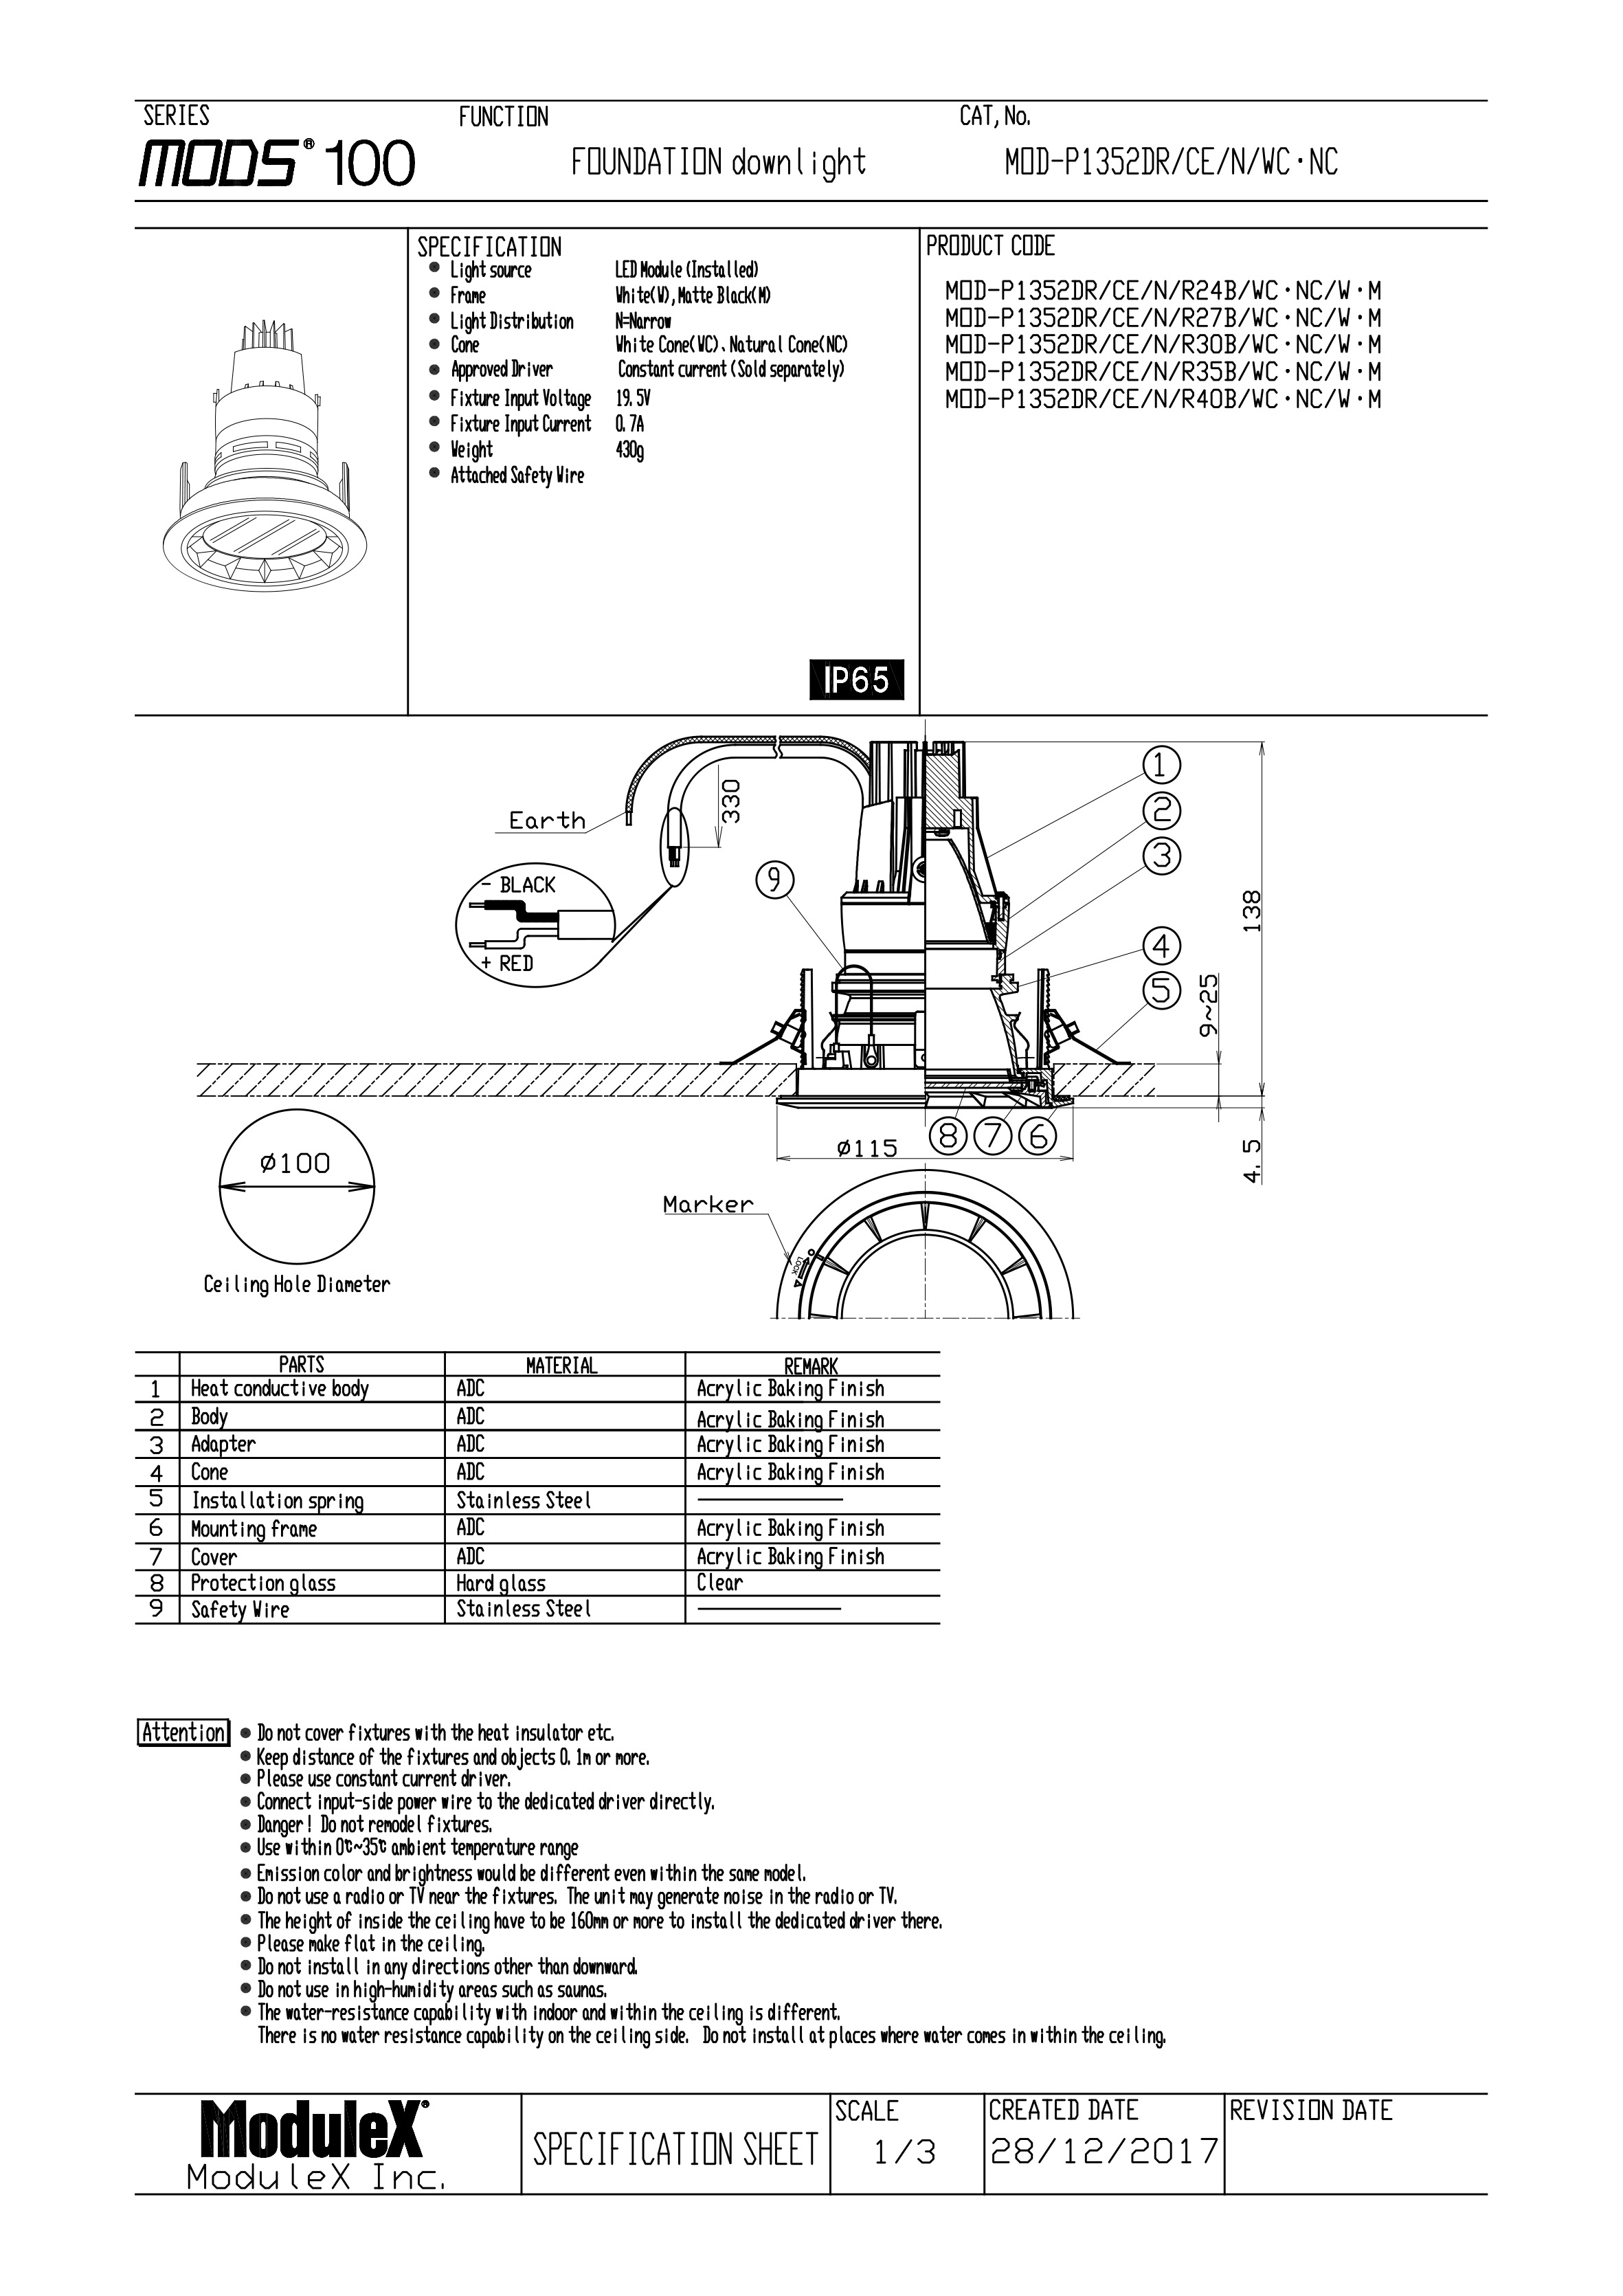 MOD-P1352DR Specification Sheet